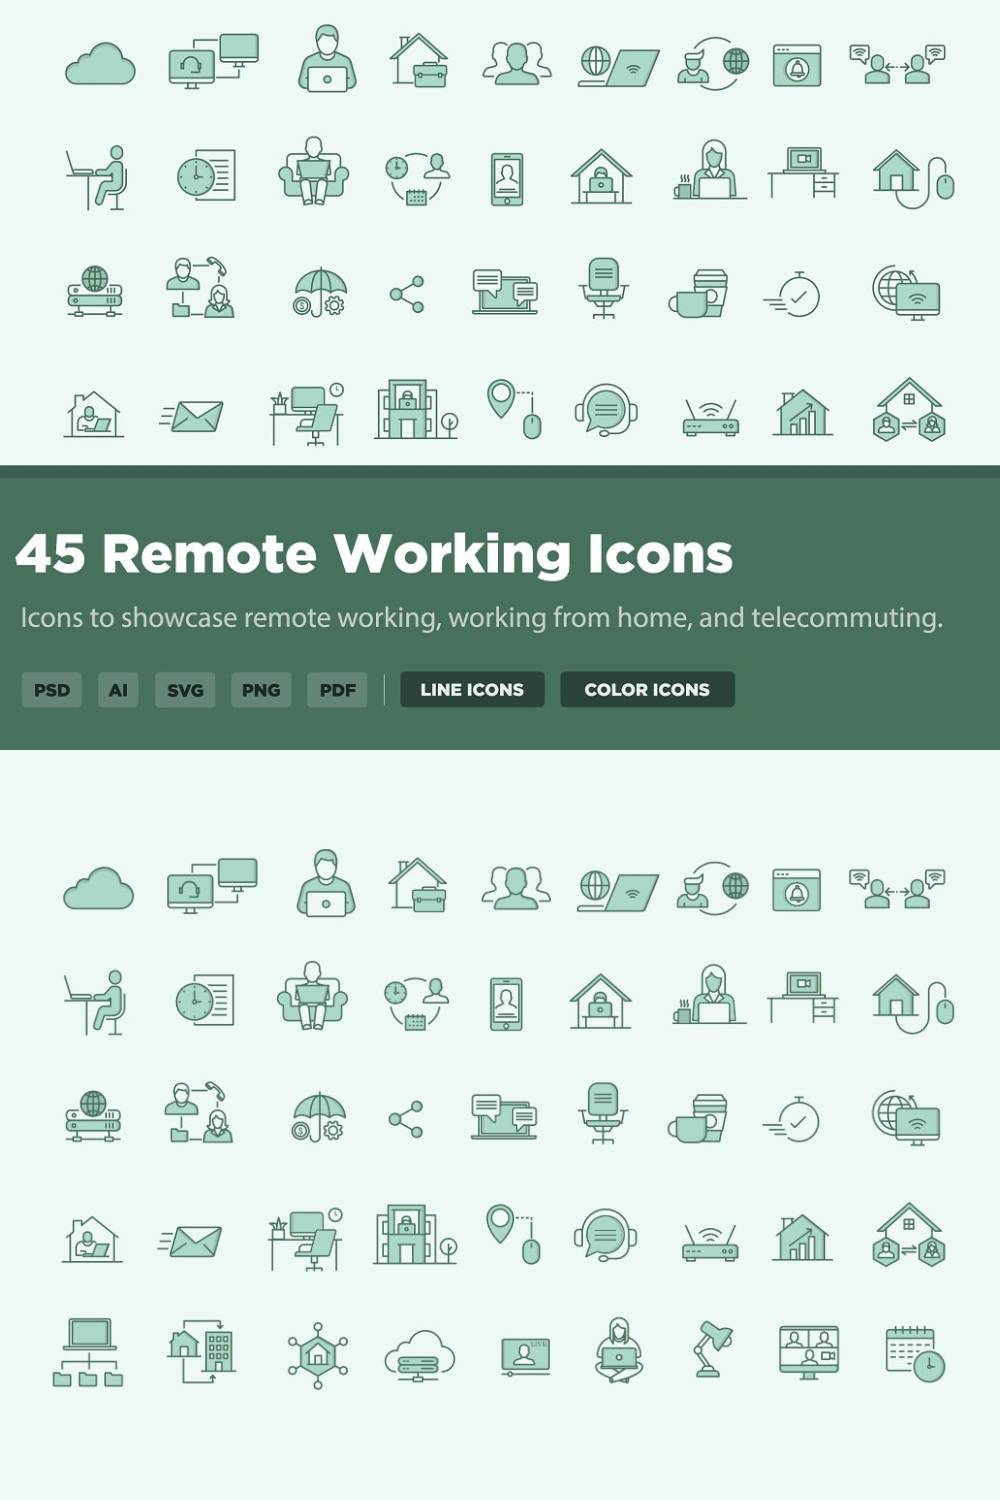 45 Remote Working Icons Pinterest Cover.